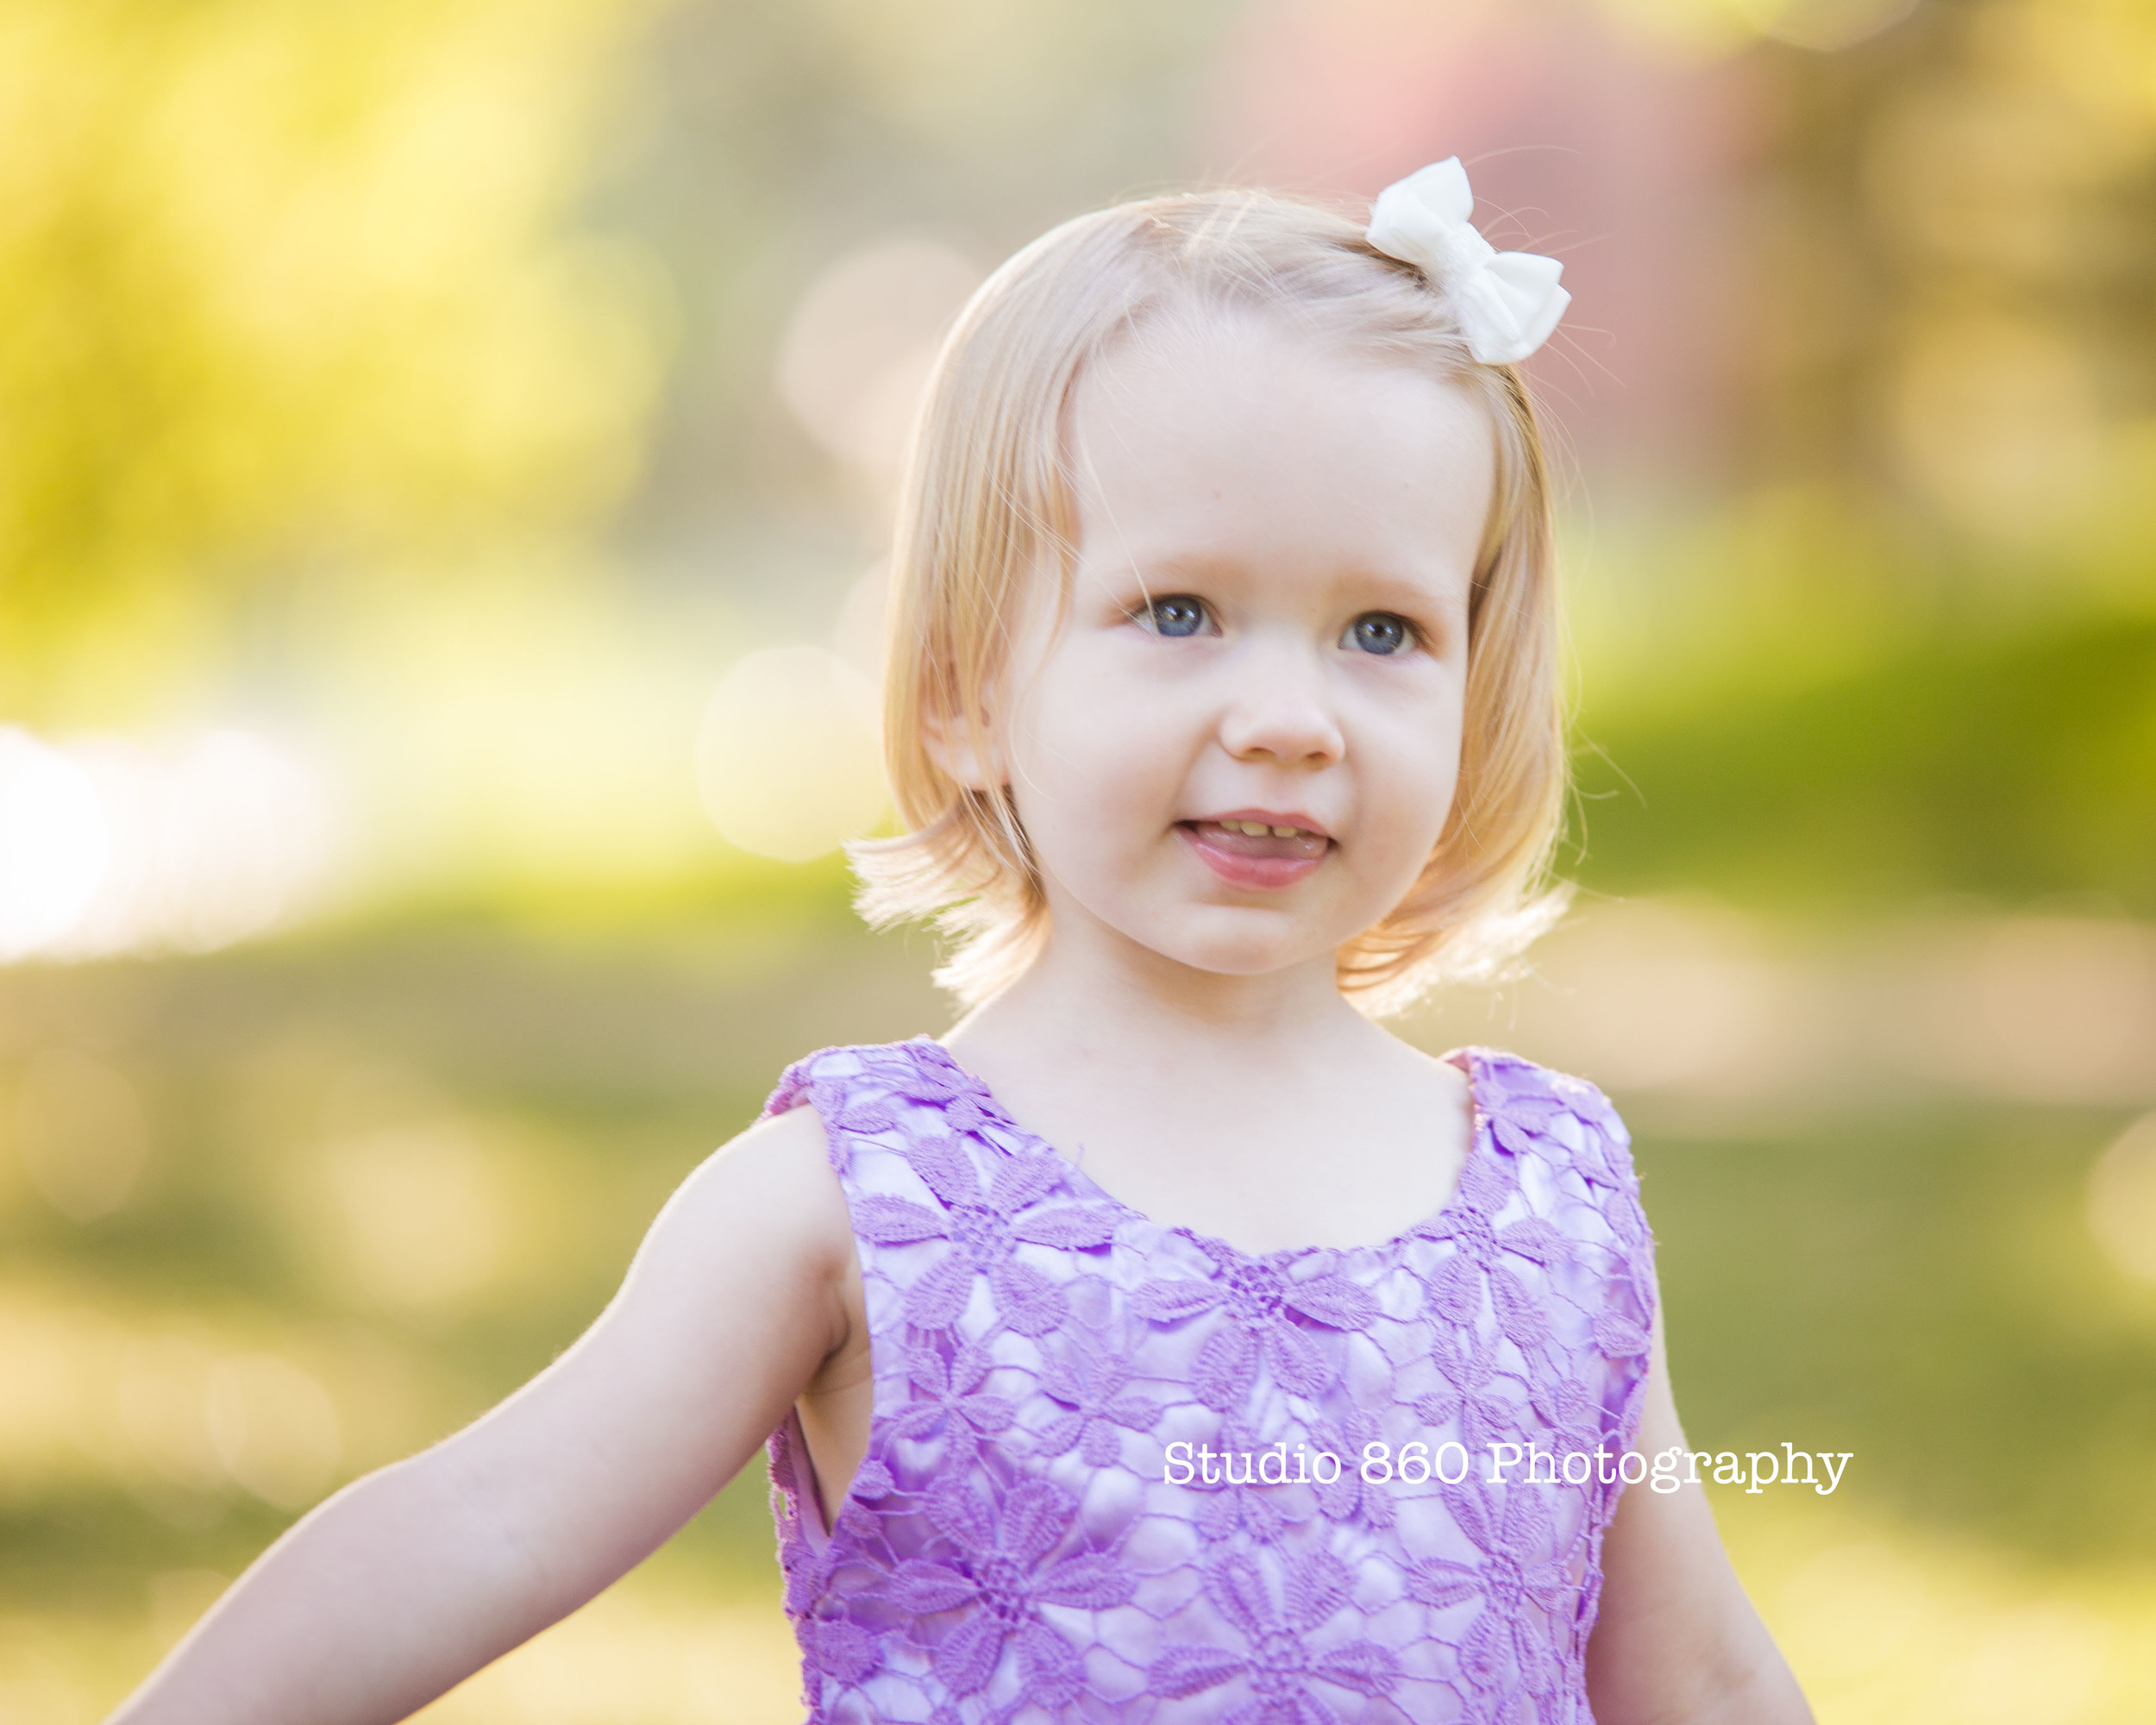 Two year old in the park. — Studio 860 Photography